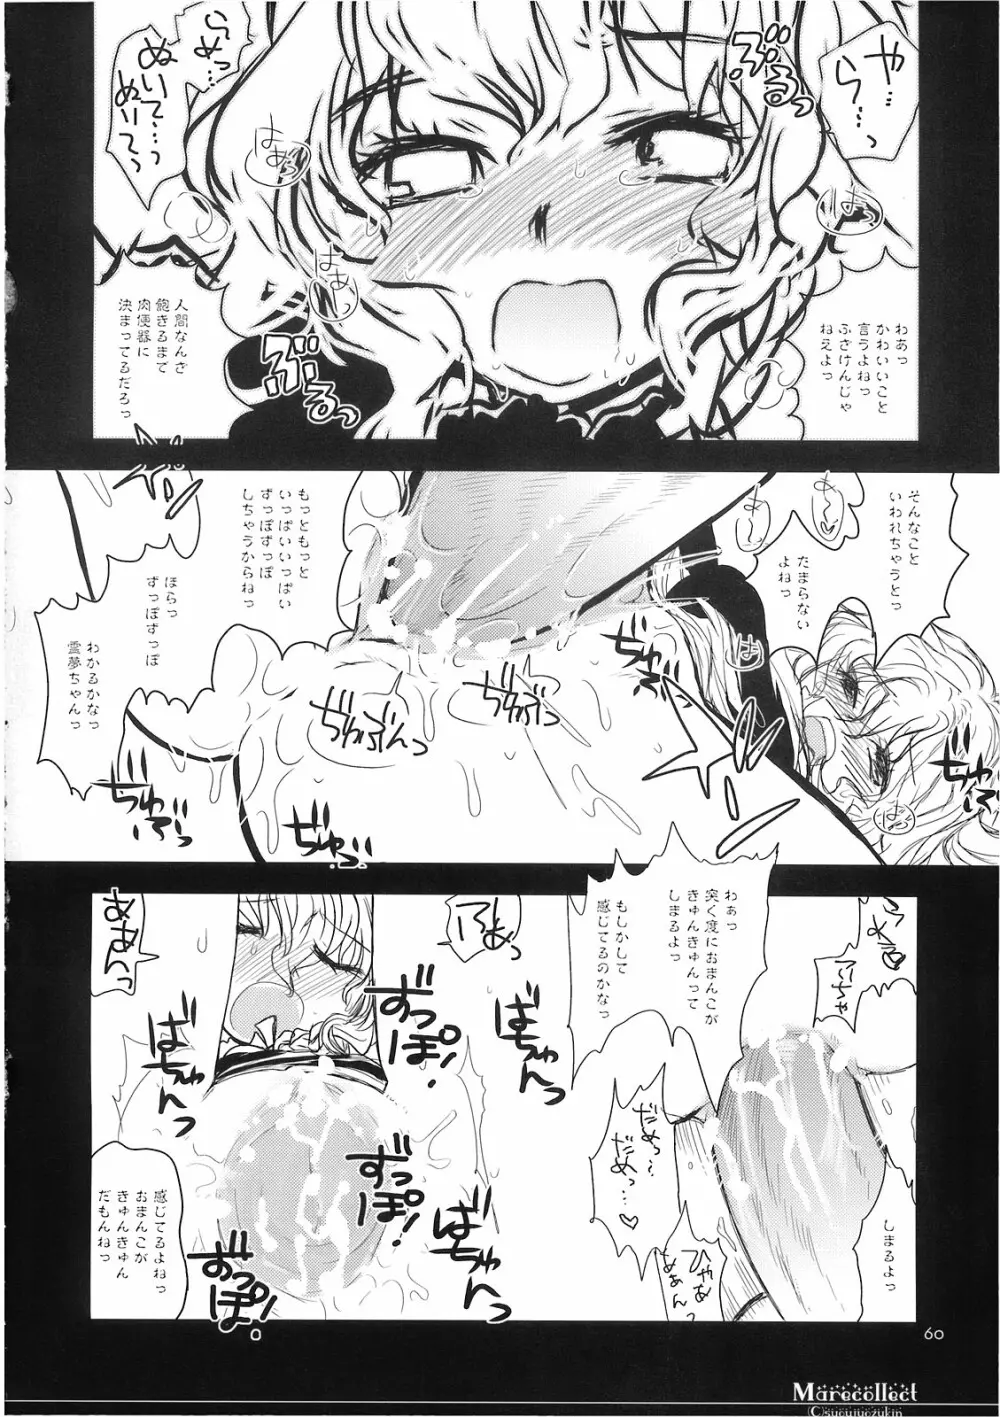 Marecollect Page.60